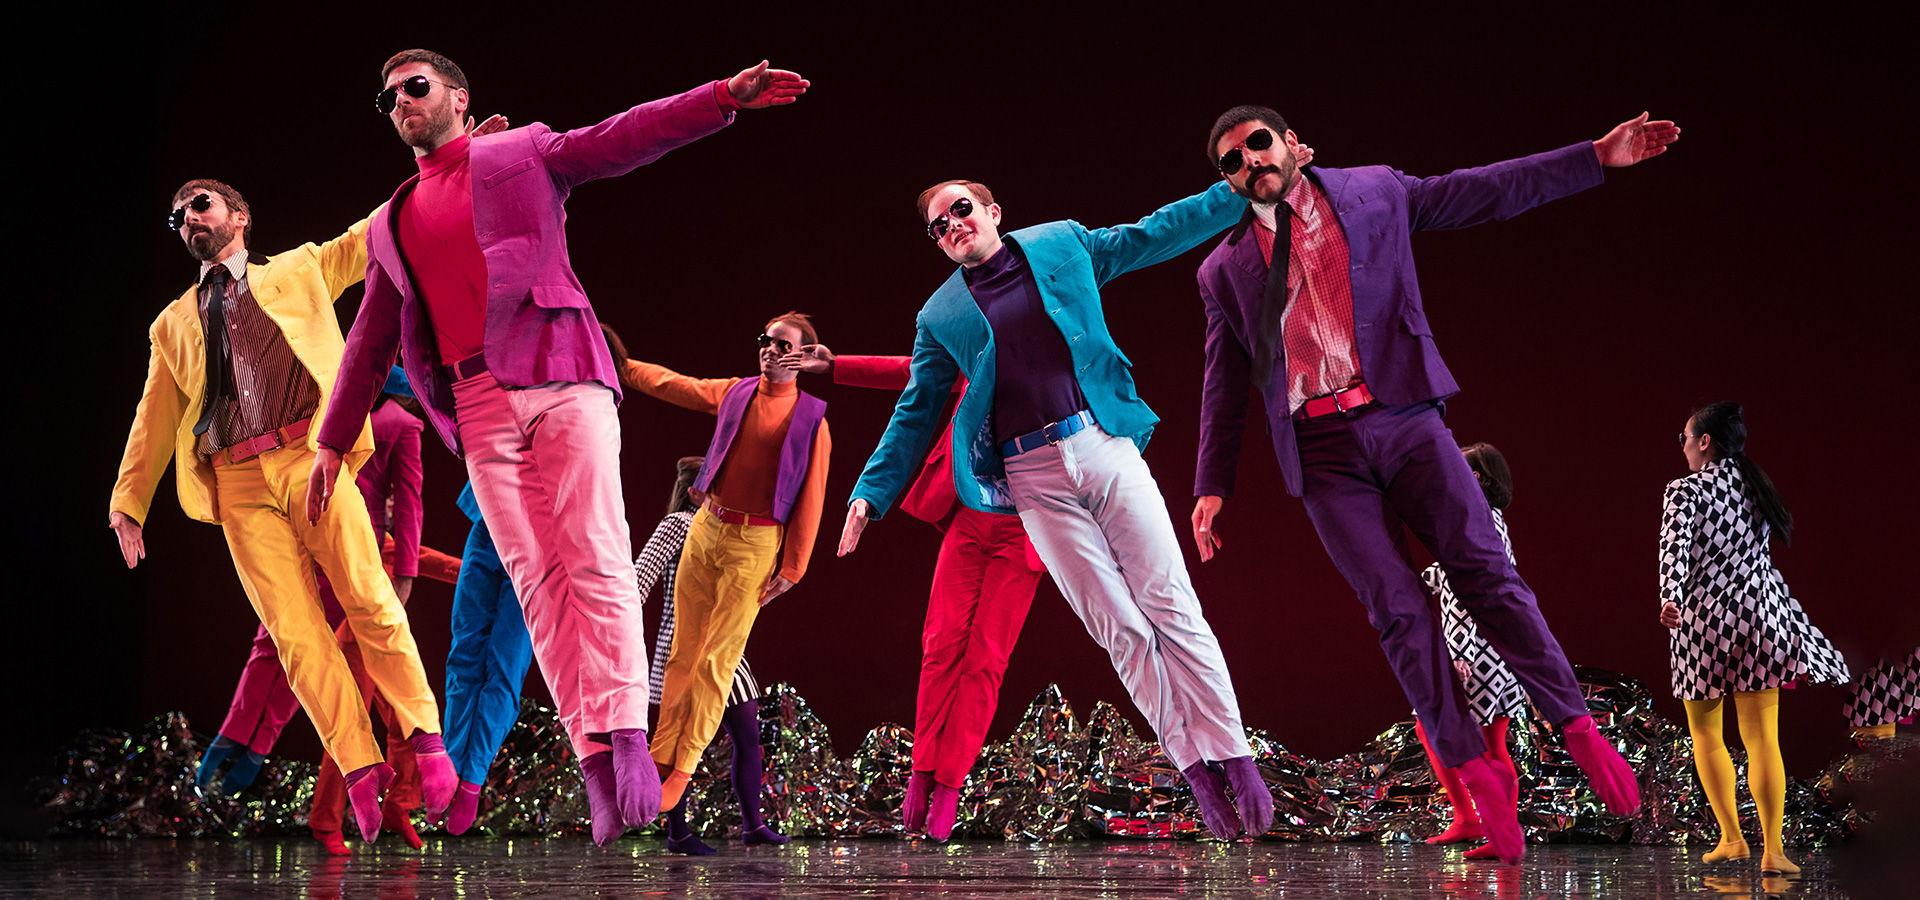 Dancers from the Mark Morris Dnace Group appear mid-jump in an on-stage performance, wearing vibrant attire with sunglasses over their eyes.